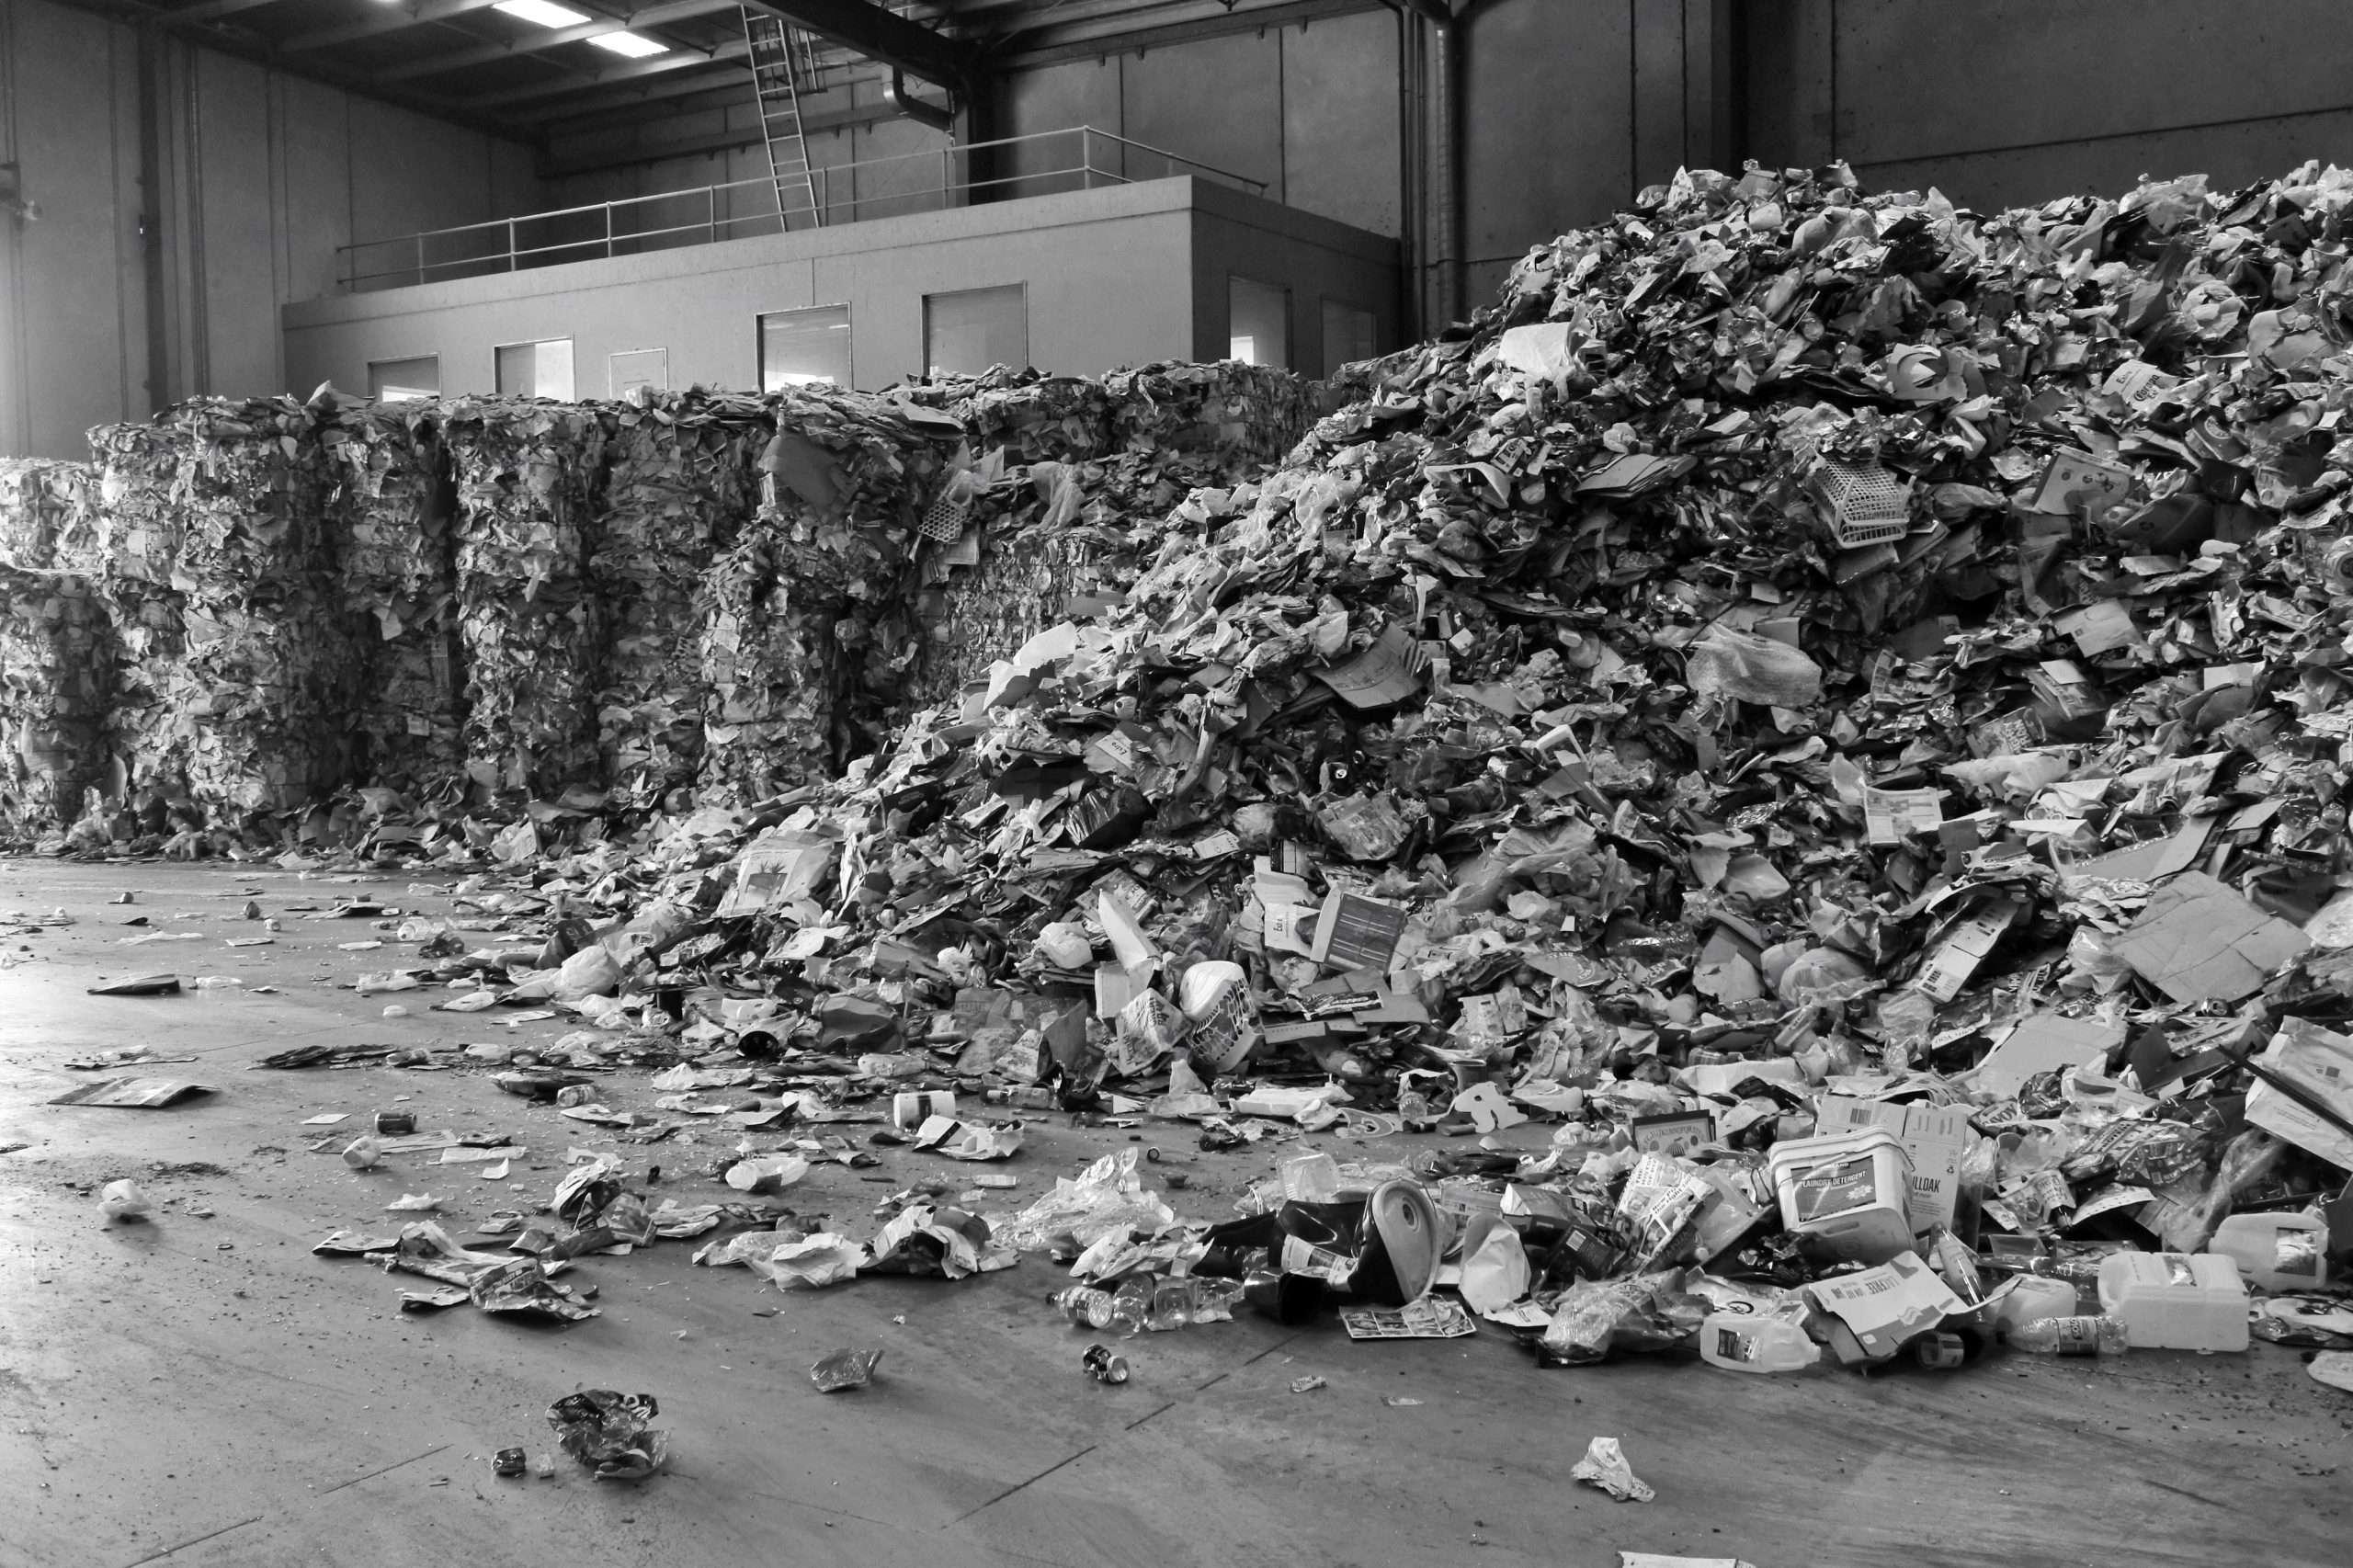 Product Mt. Non-Recyclable – The Aftermath of China’s Ban on Exporting Waste Products | Helia EHS image